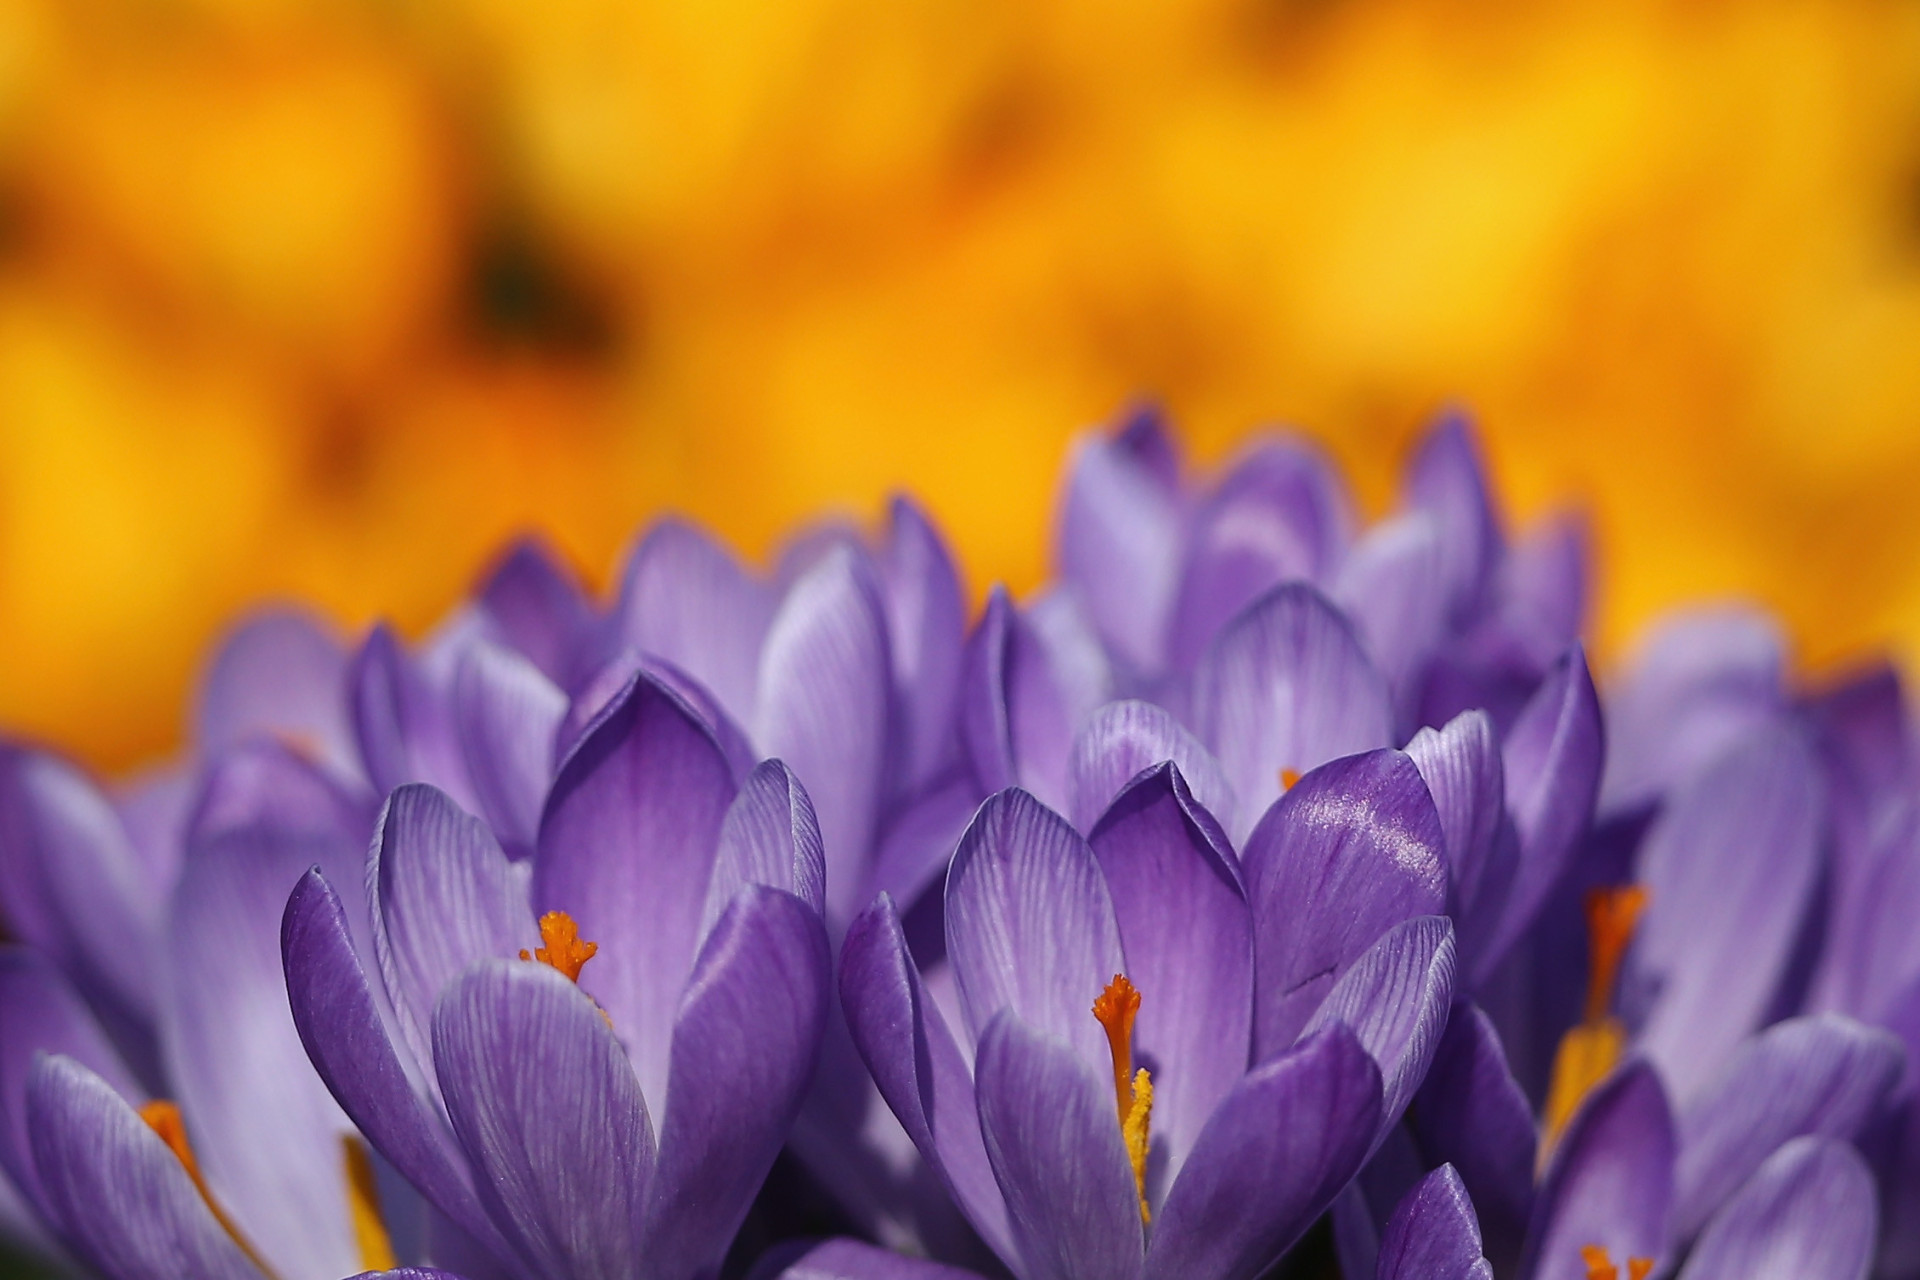 Crocuses bloom as spring arrives in Hyde Park.<p><a href="https://www.msn.com/en-us/community/channel/vid-7xx8mnucu55yw63we9va2gwr7uihbxwc68fxqp25x6tg4ftibpra?cvid=94631541bc0f4f89bfd59158d696ad7e">Follow us and access great exclusive content every day</a></p>